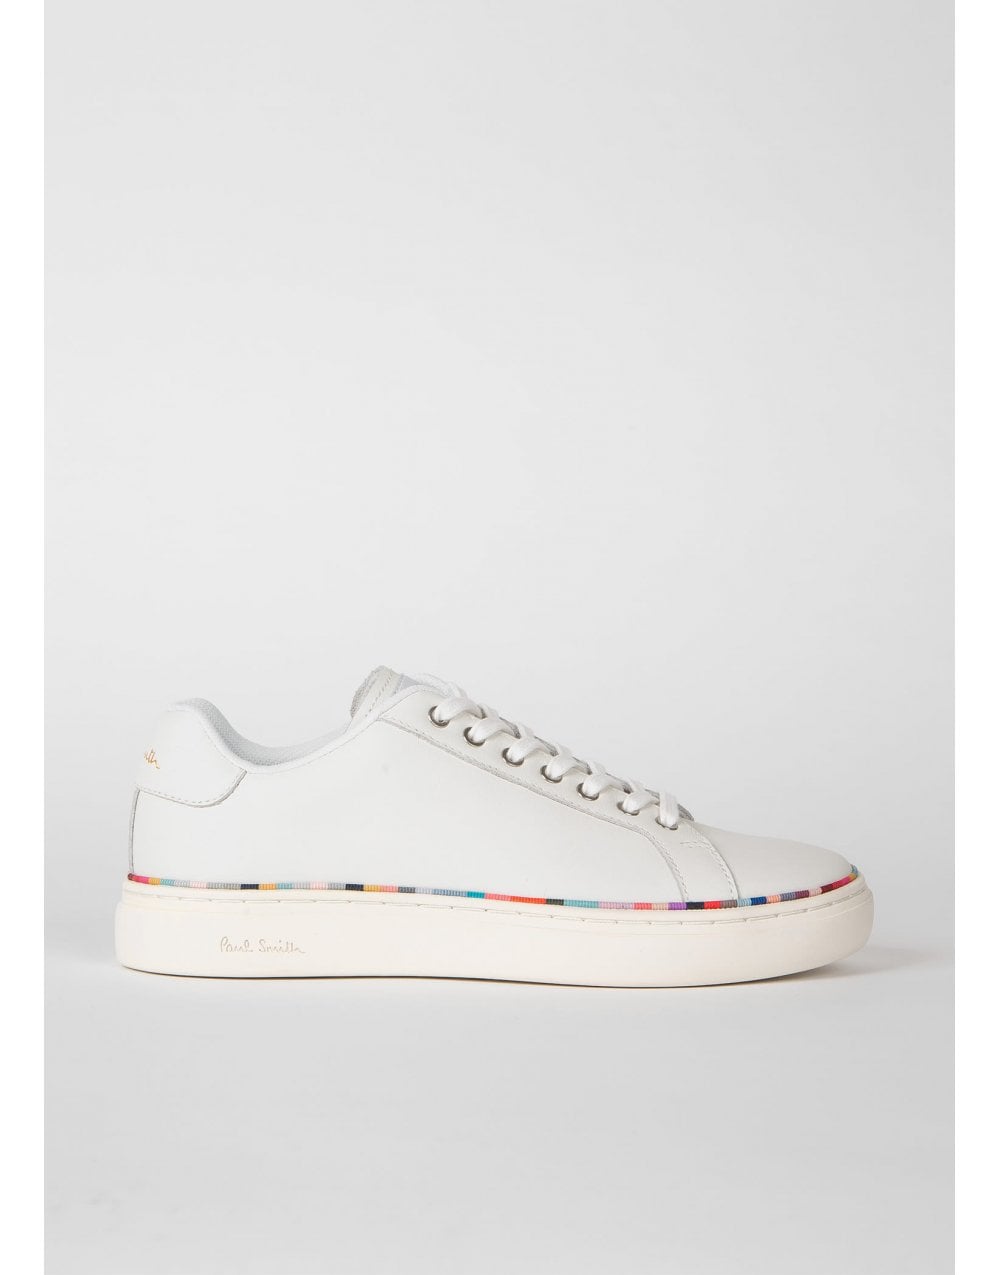 Paul Smith White Lapin Swirl Sole Band Trainers